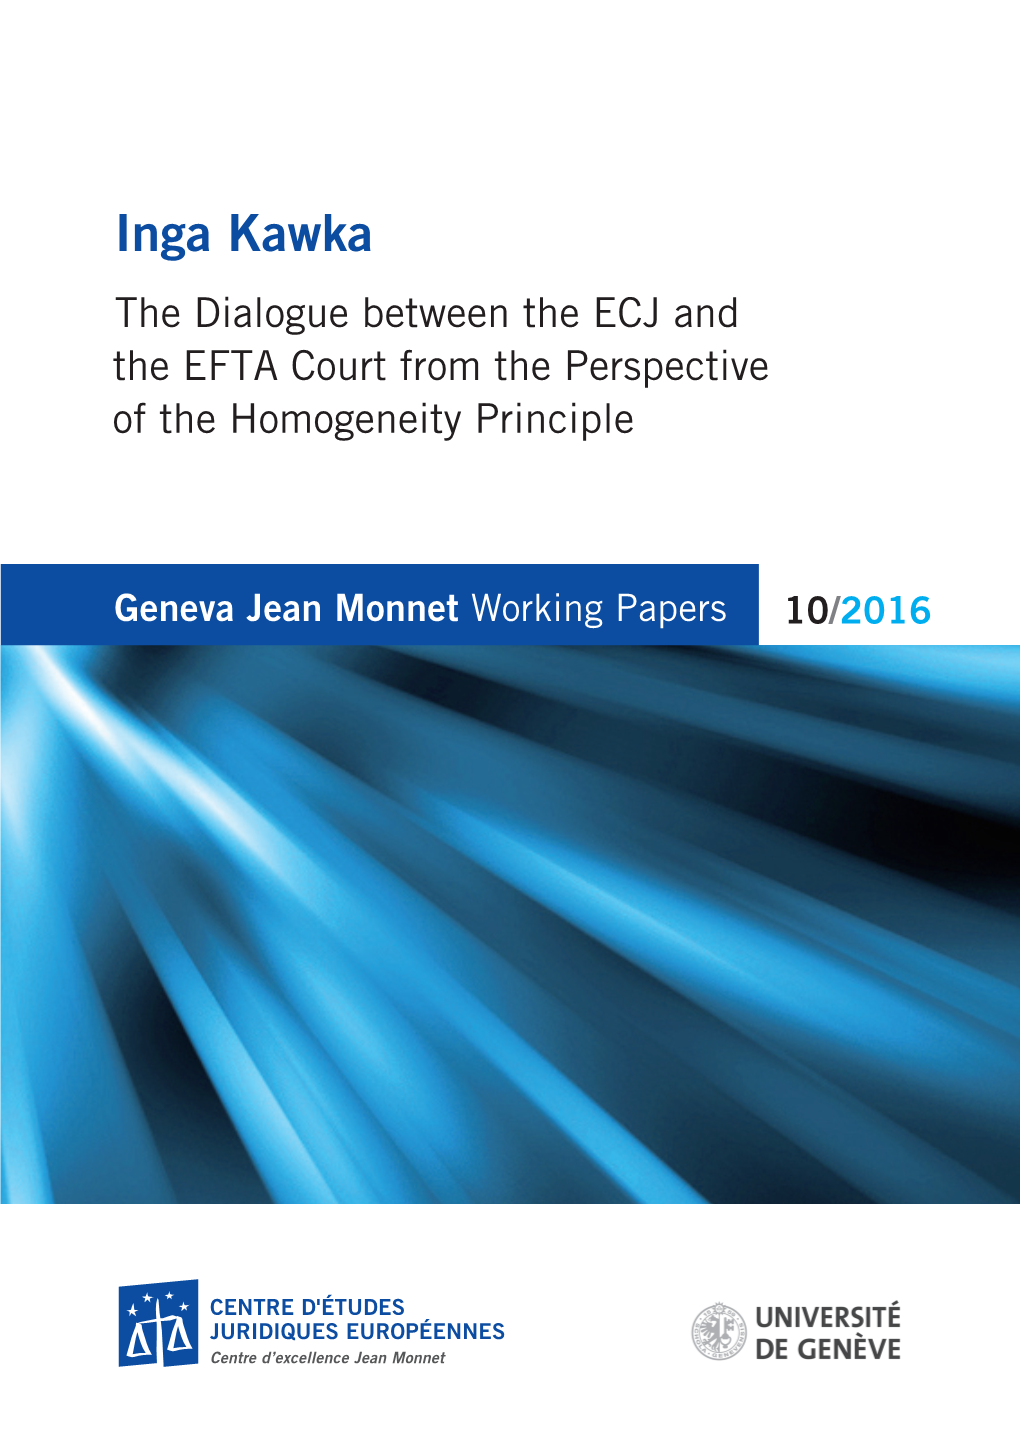 Inga Kawka the Dialogue Between the ECJ and the EFTA Court from the Perspective of the Homogeneity Principle